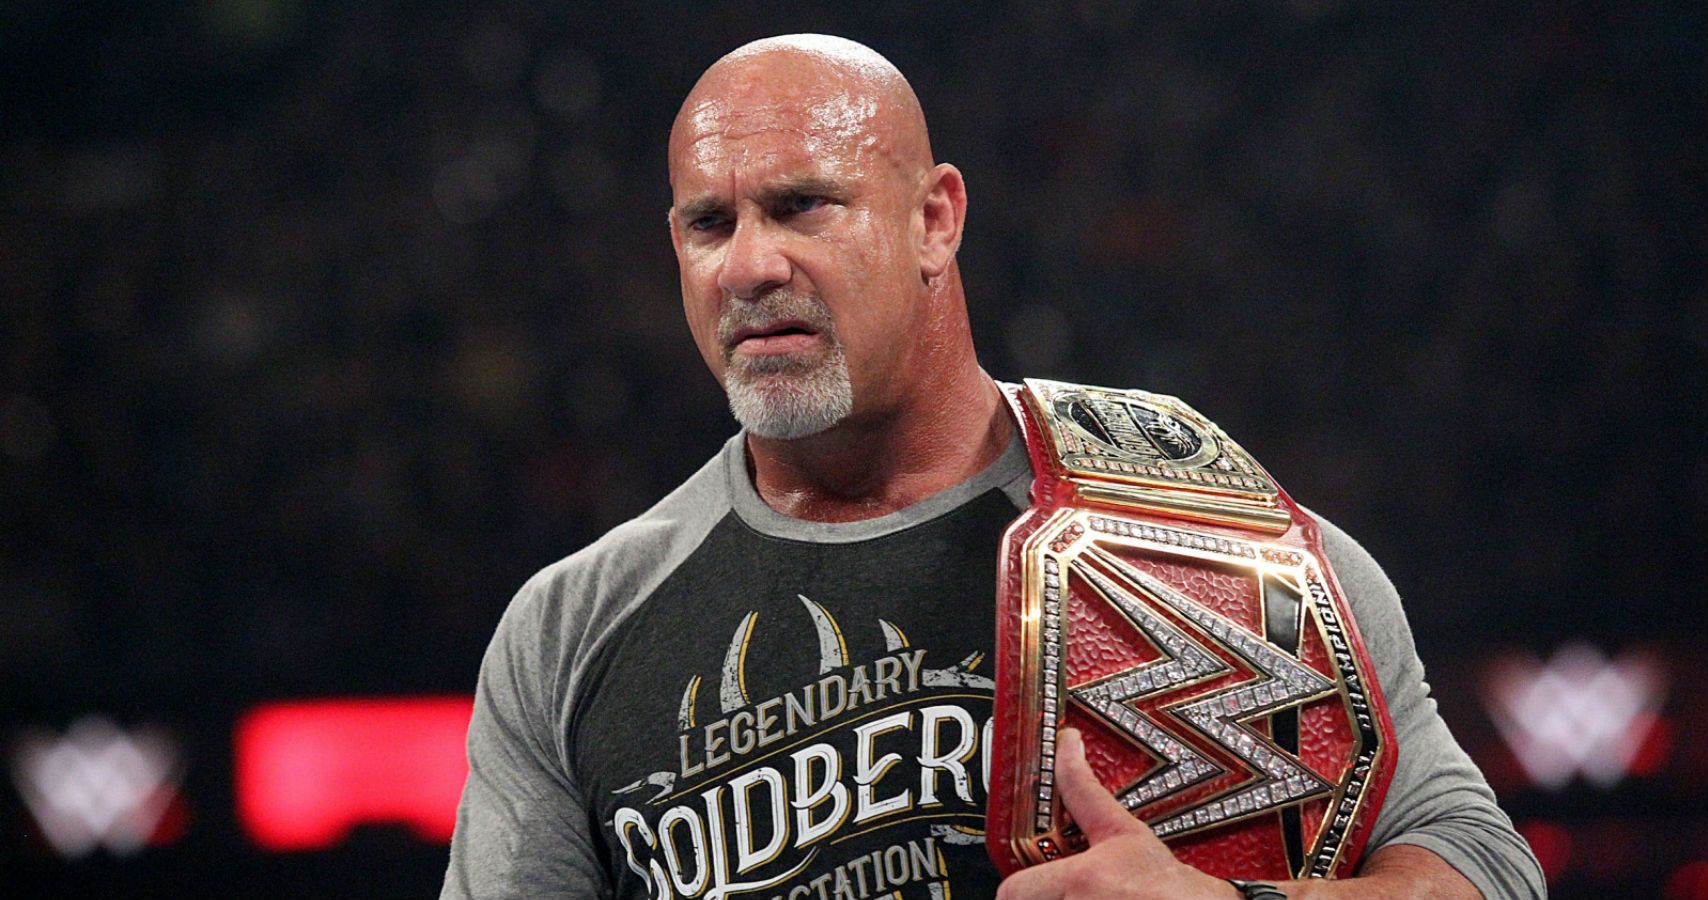 Bill Goldberg In AEW Tony Khan Confirms Desire To Sign WWE Hall Of Famer.